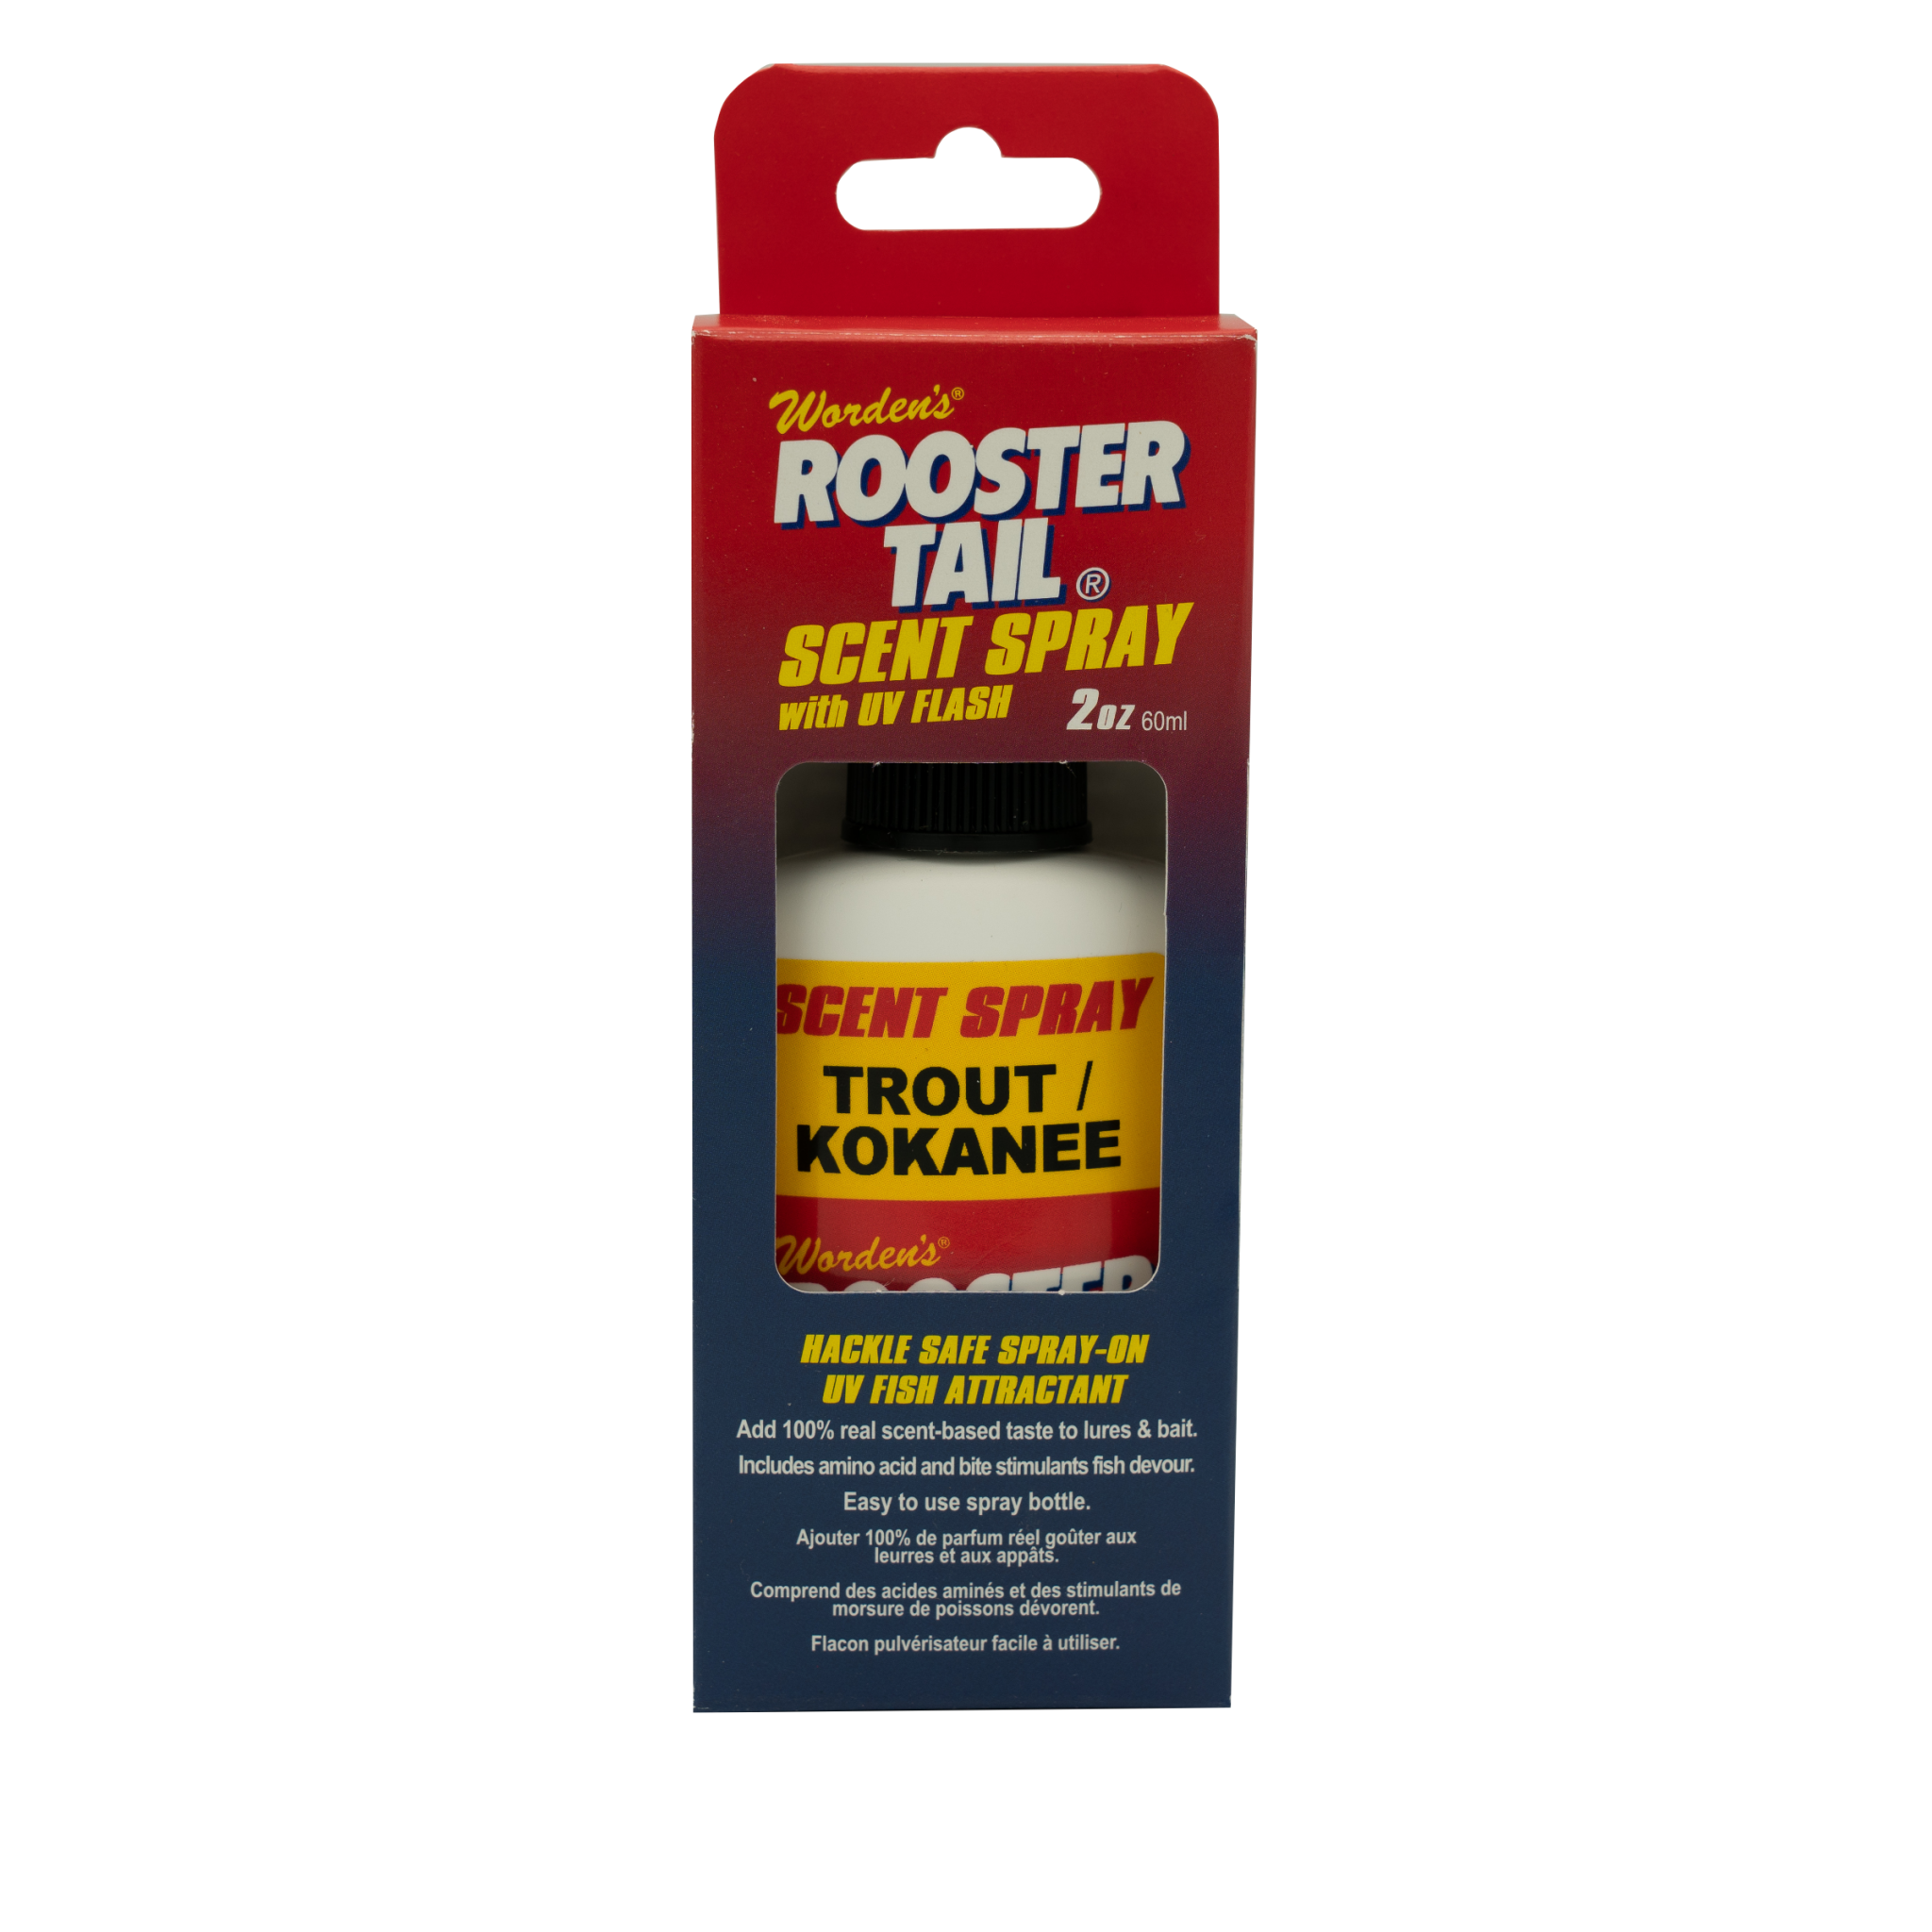 ROOSTER TAIL SCENT SPRAY TROUT / KOKANEE